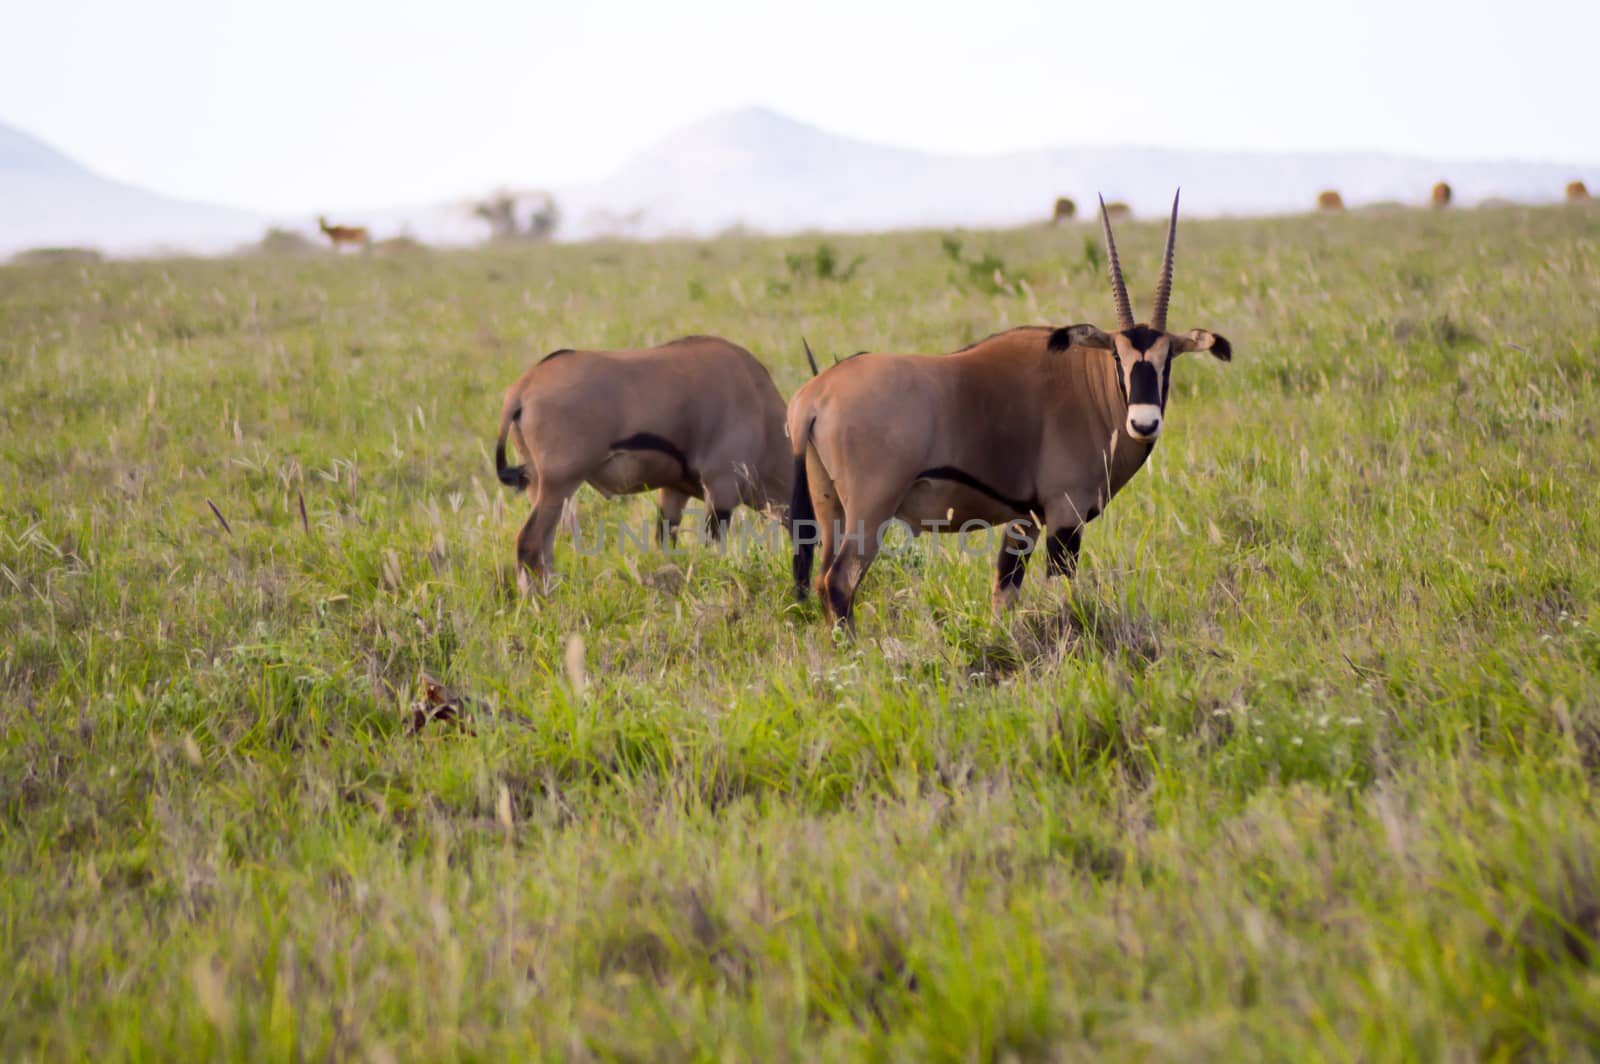 Oryx grazing in the savanna  by Philou1000